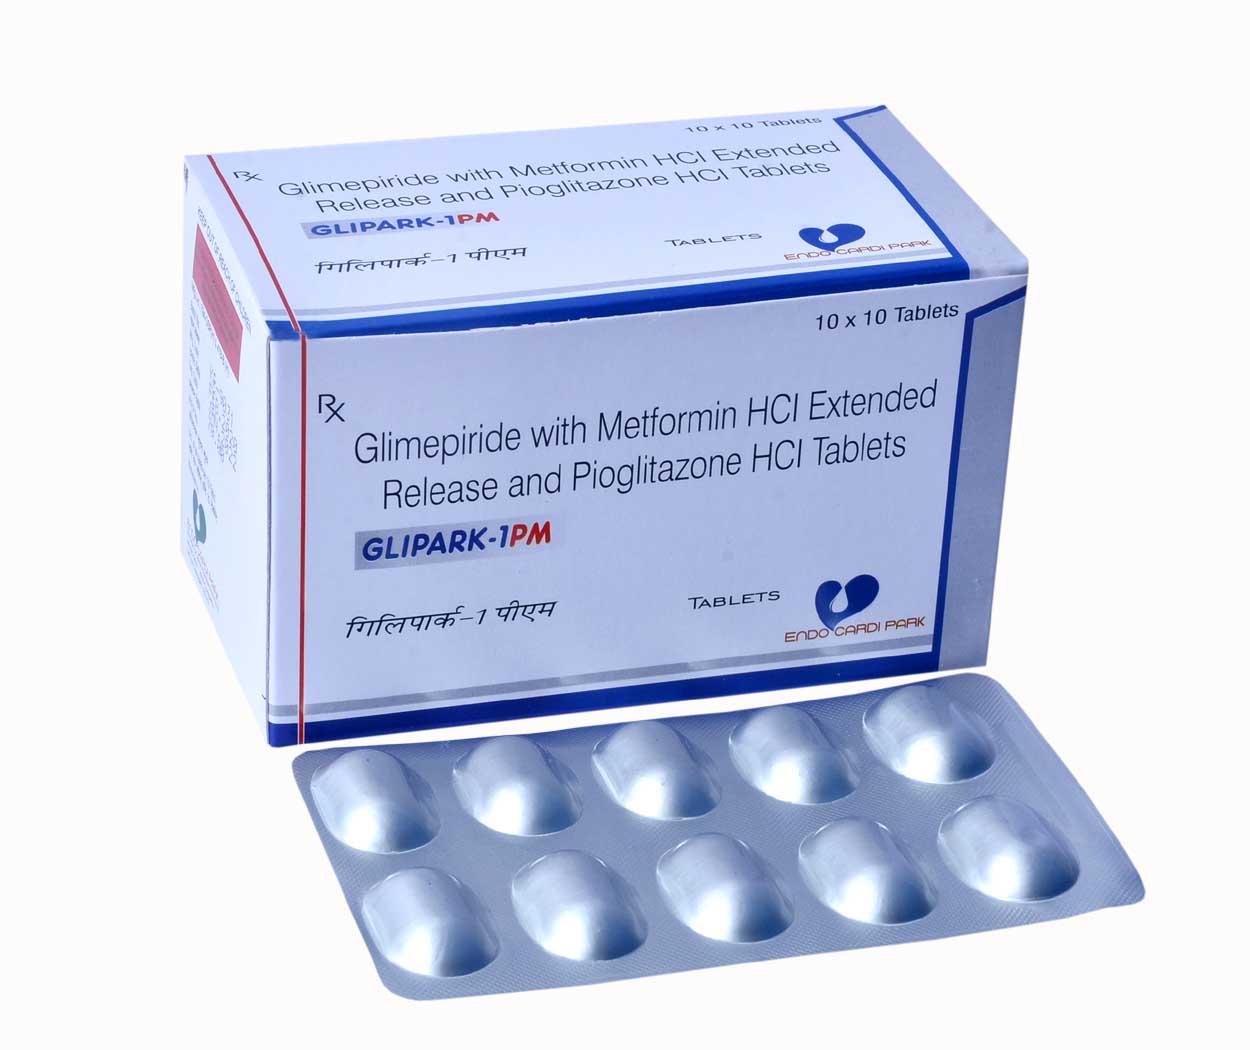 Product Name: GLIPARK 1PM, Compositions of GLIPARK 1PM are Glimepiride with Metformin HCI Extended Release and Pioglitazone HCI Tablets - Park Pharmaceuticals